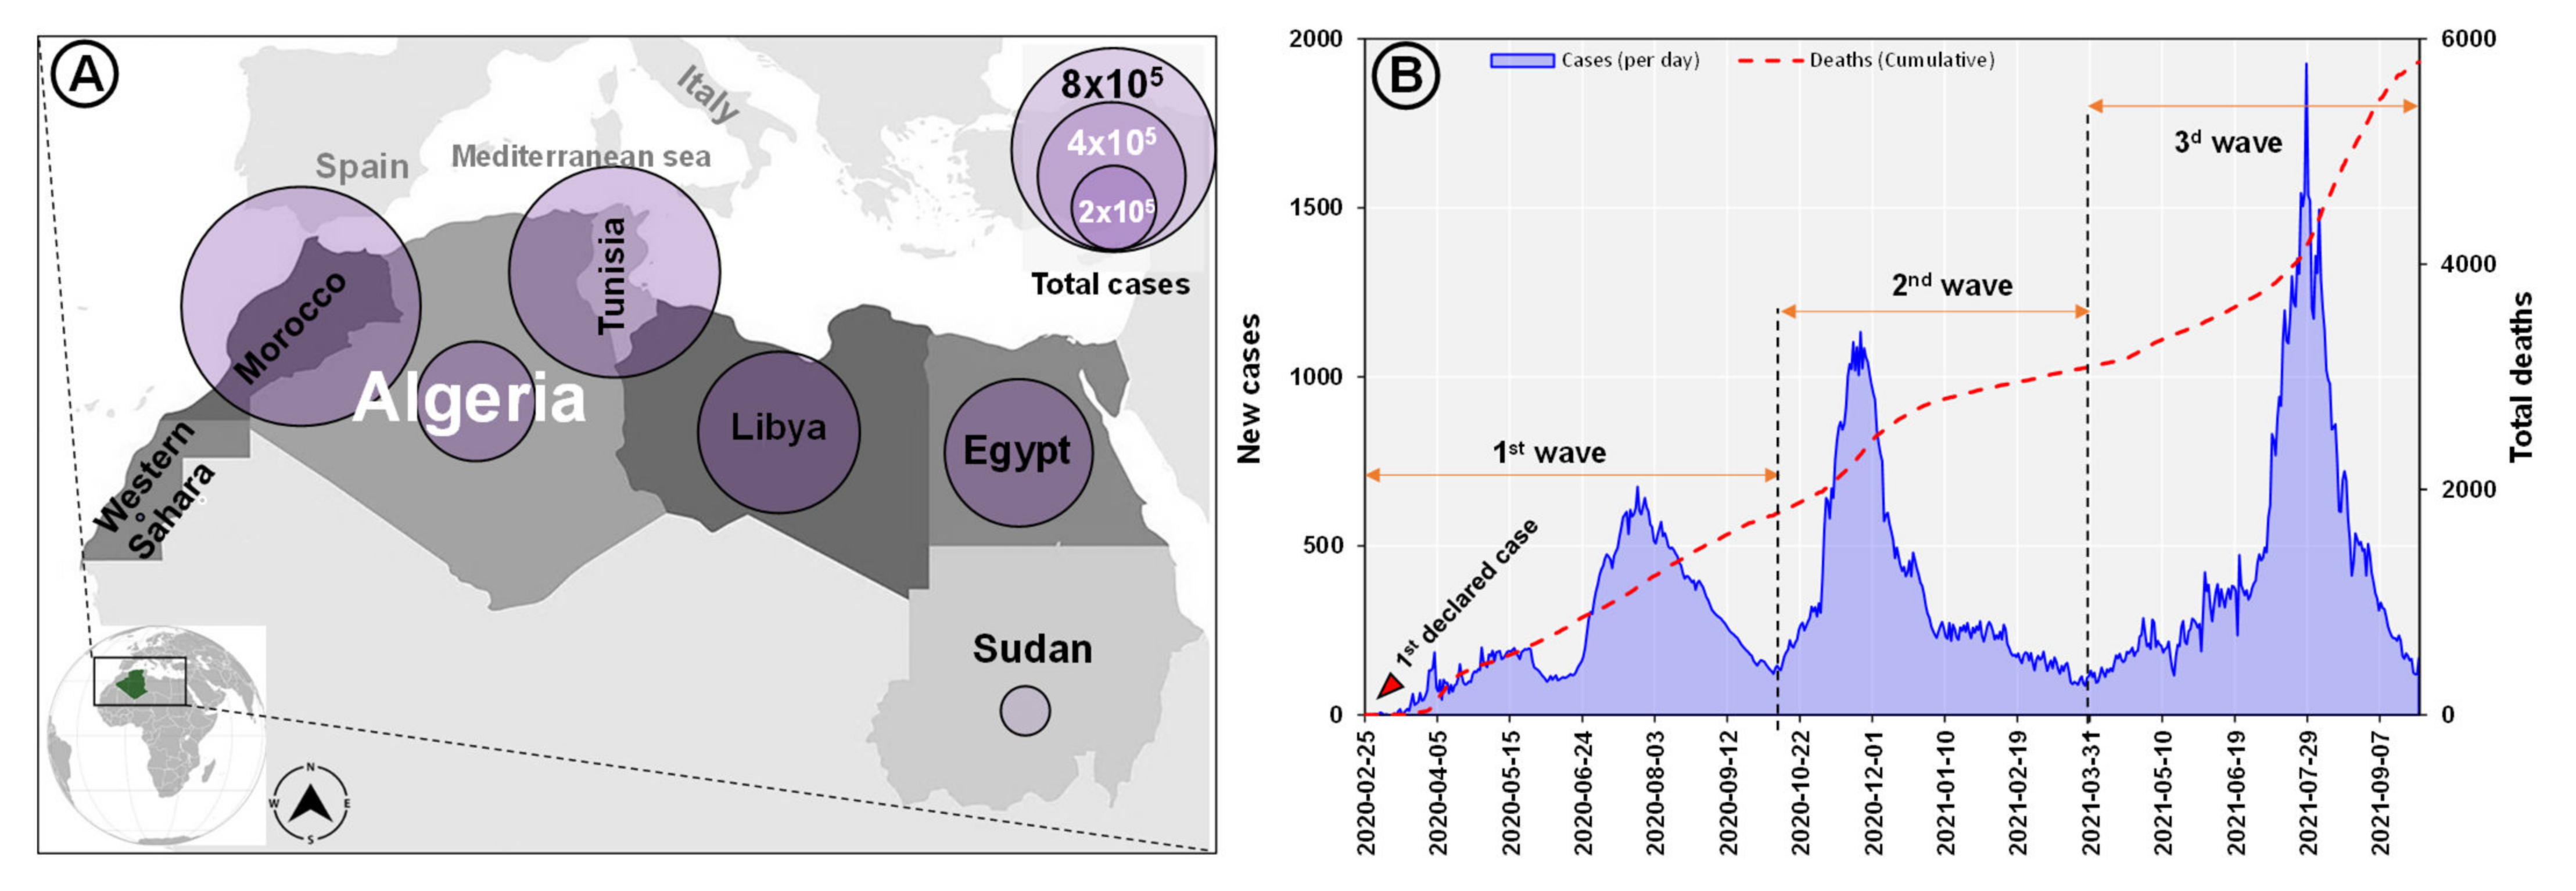 Microorganisms | Free Full-Text | Genomic Diversity of SARS-CoV-2 in  Algeria and North African Countries: What We Know So Far and What We Expect?